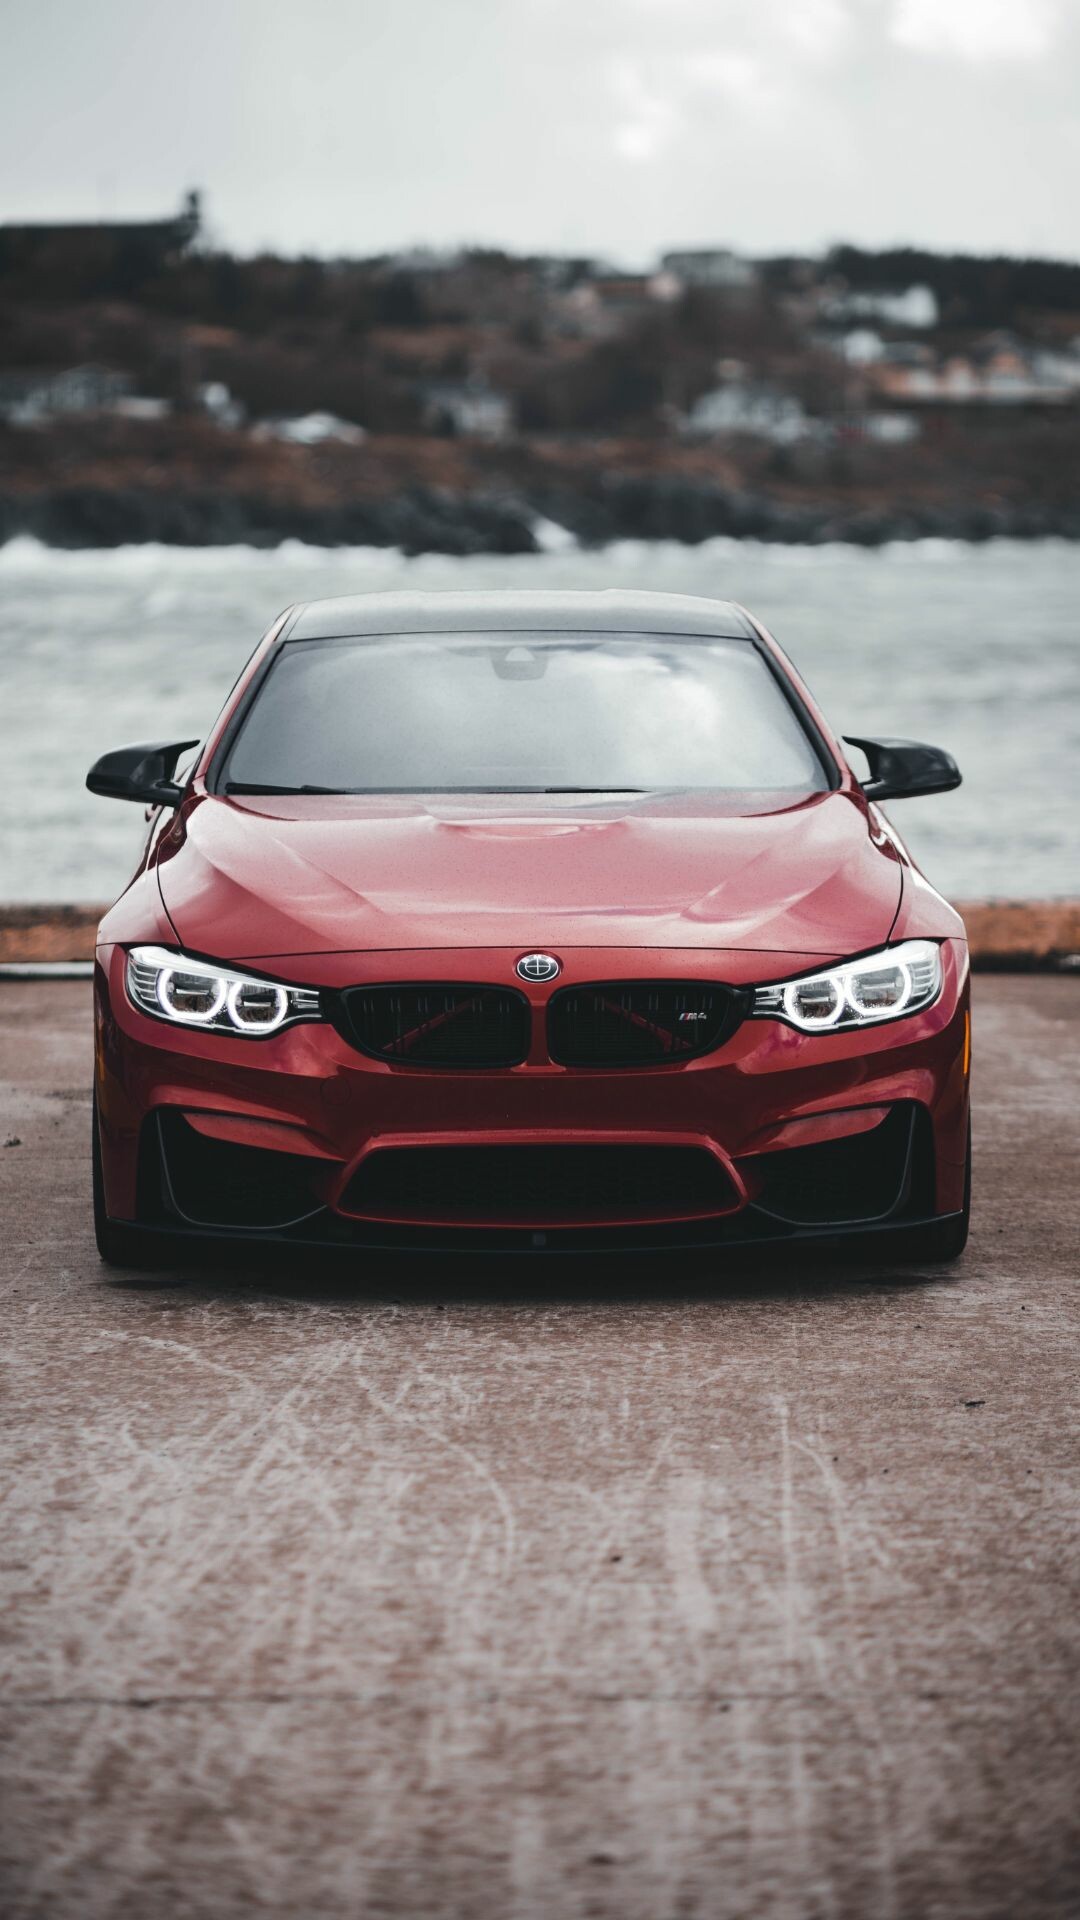 BMW 2 Series: A German automotive manufacturer, A range of subcompact executive cars. 1080x1920 Full HD Wallpaper.